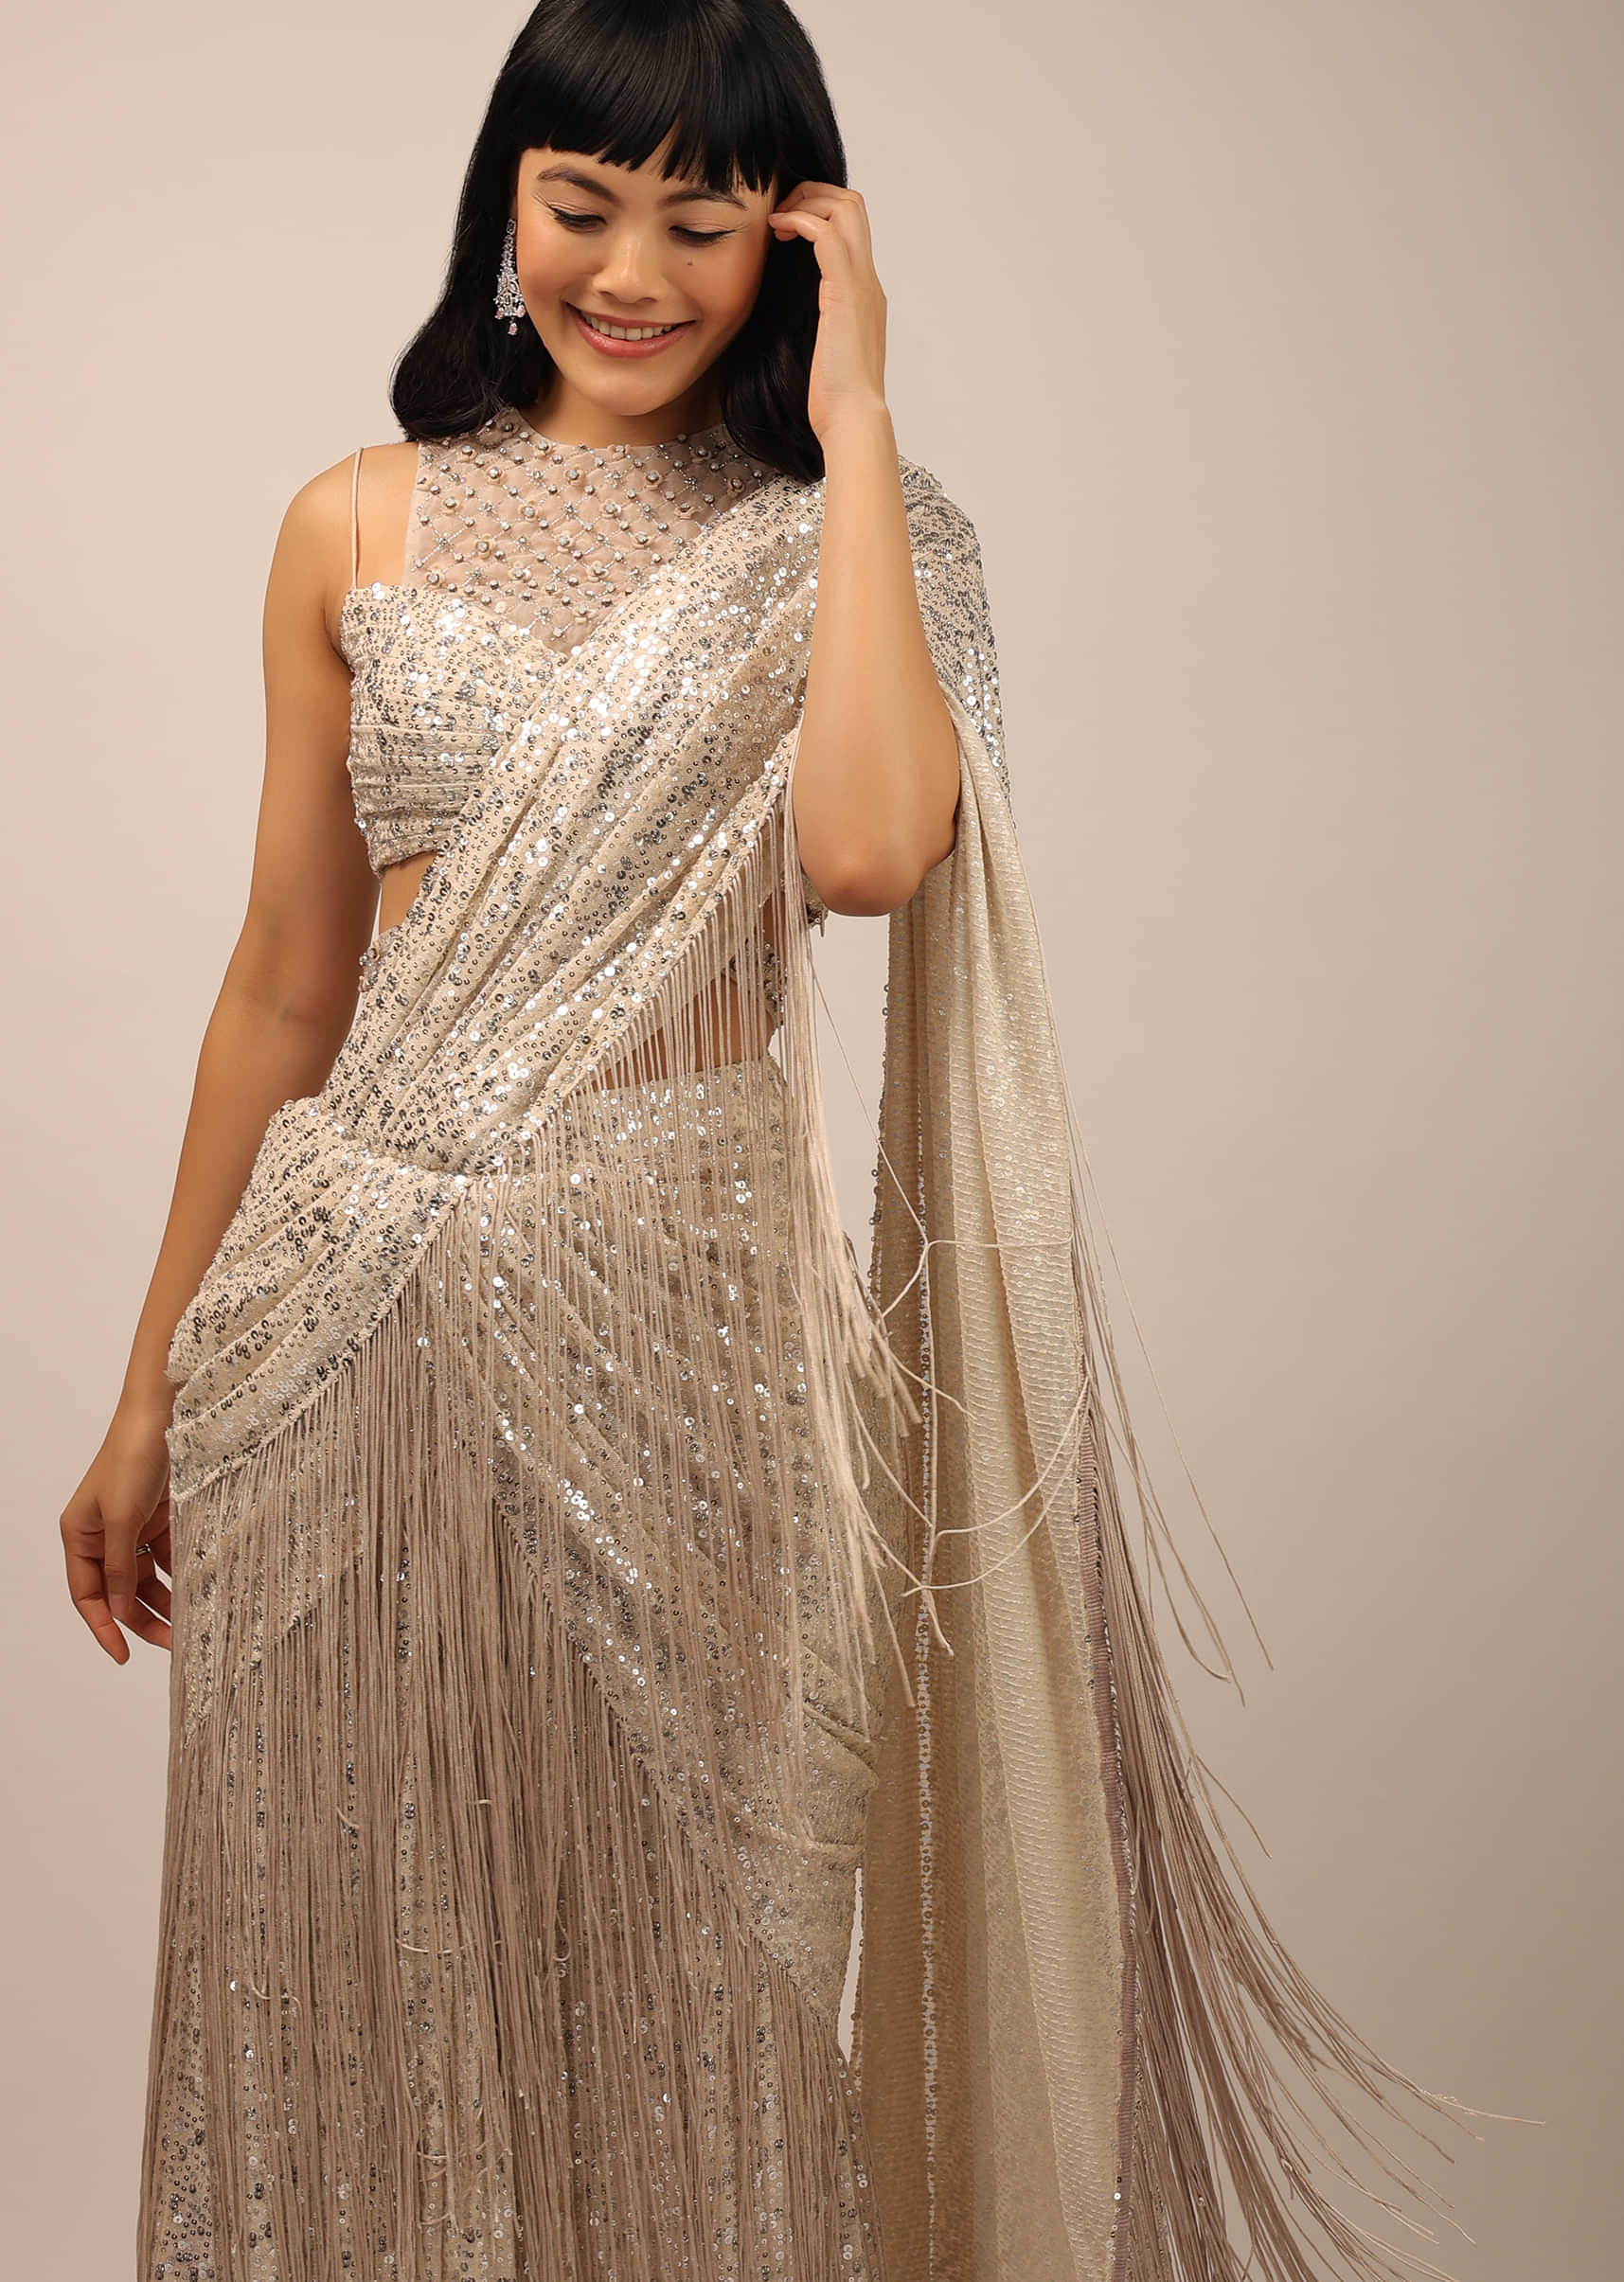 White Sequins Saree With A Fringe Border And Blouse With A Fancy Neckline